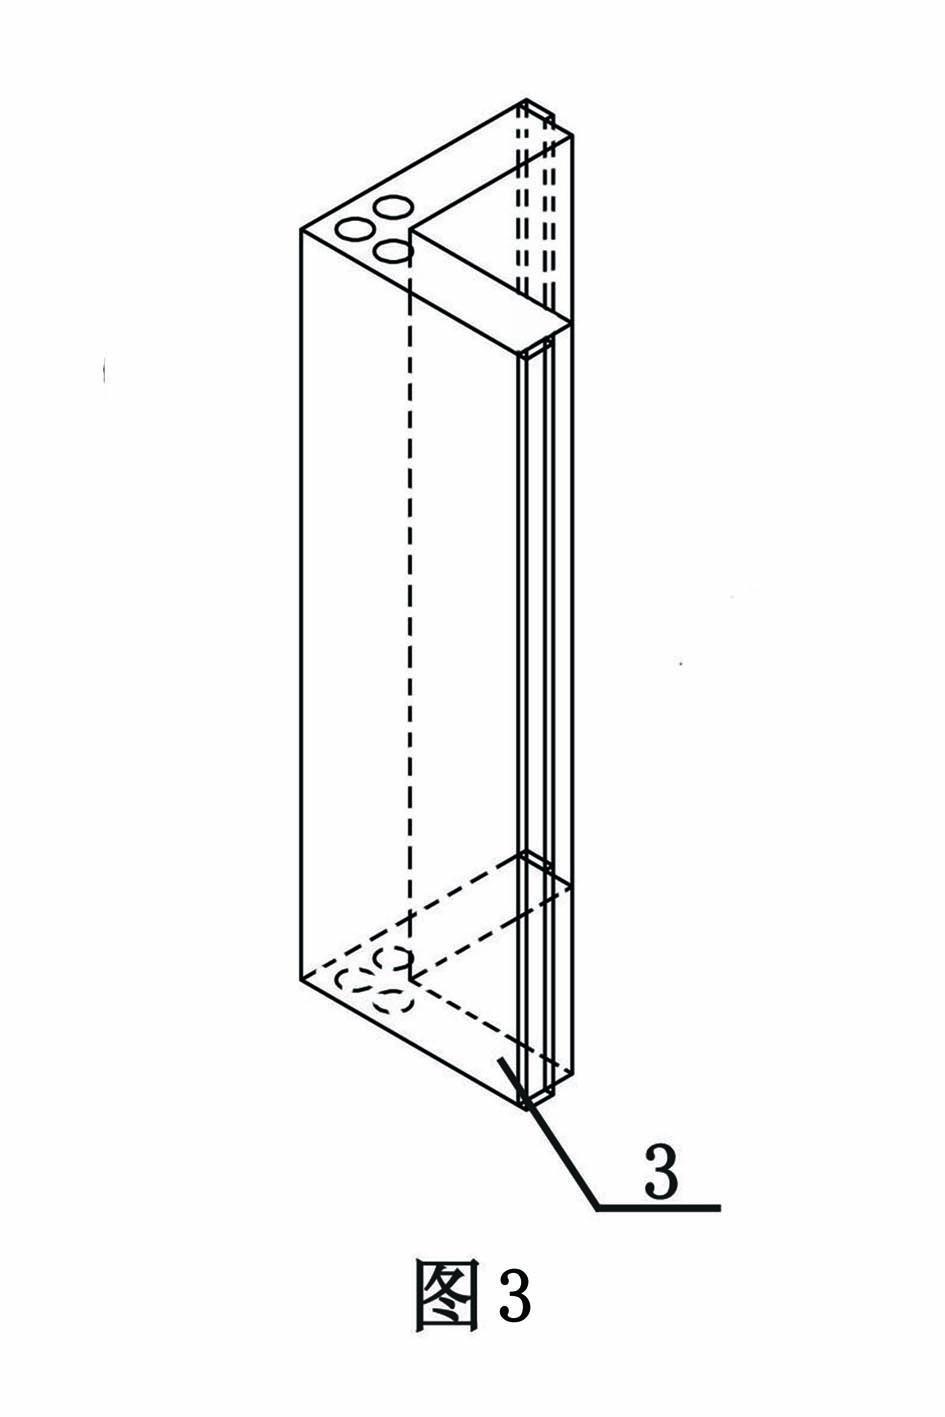 Prefabricated column of reserved concealed column channel, concealed column type complete assembled earthquake-resistant building and its method